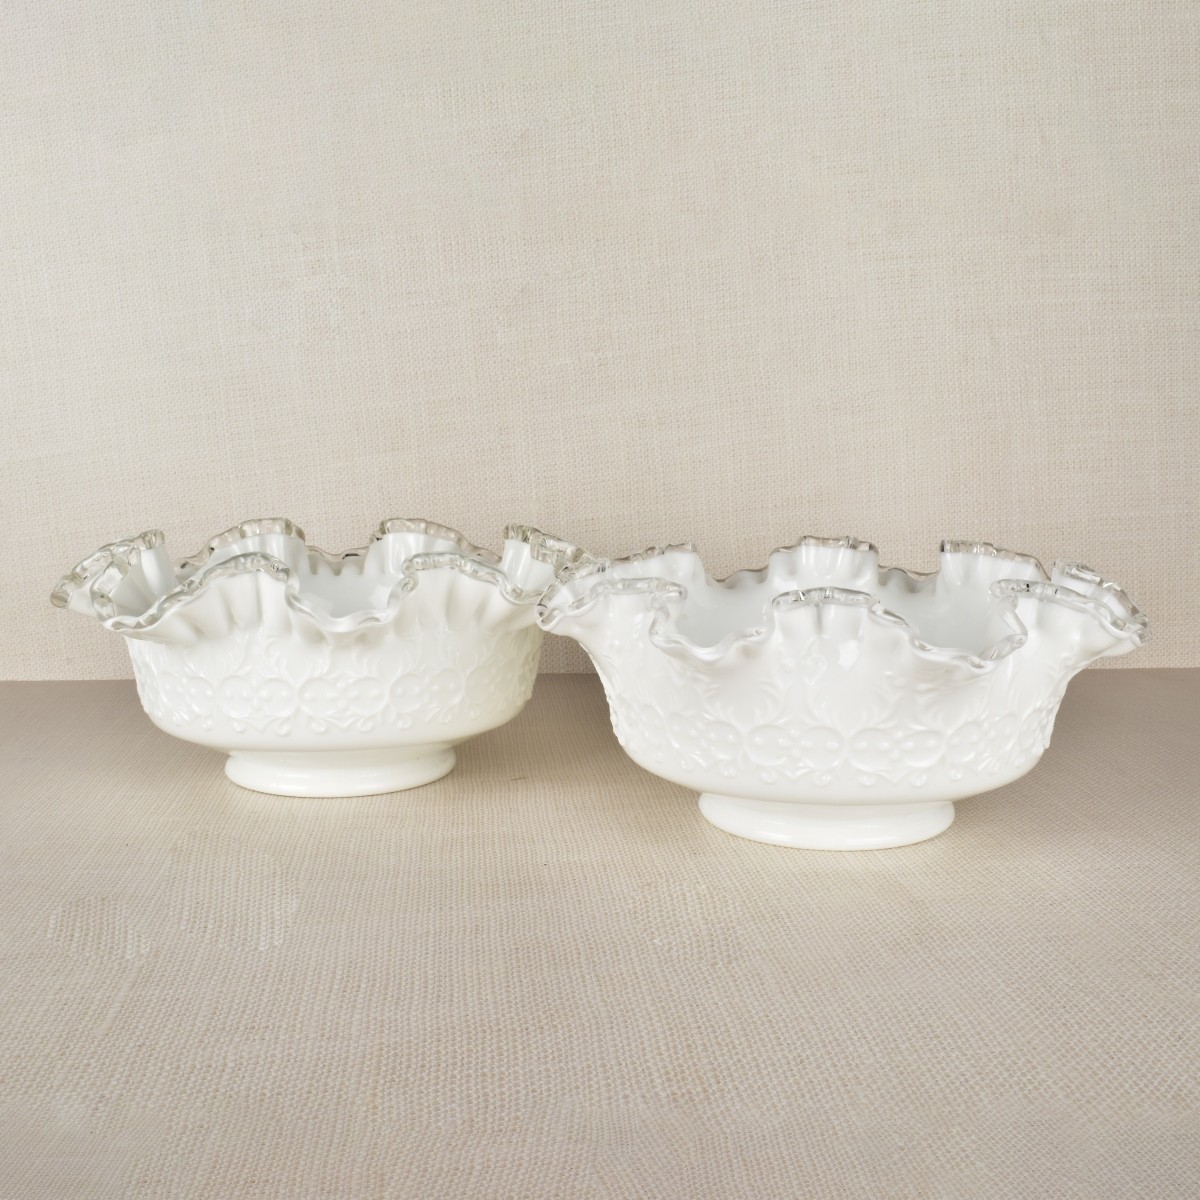 Two Fenton "Spanish Lace Silver Crest" Bowls